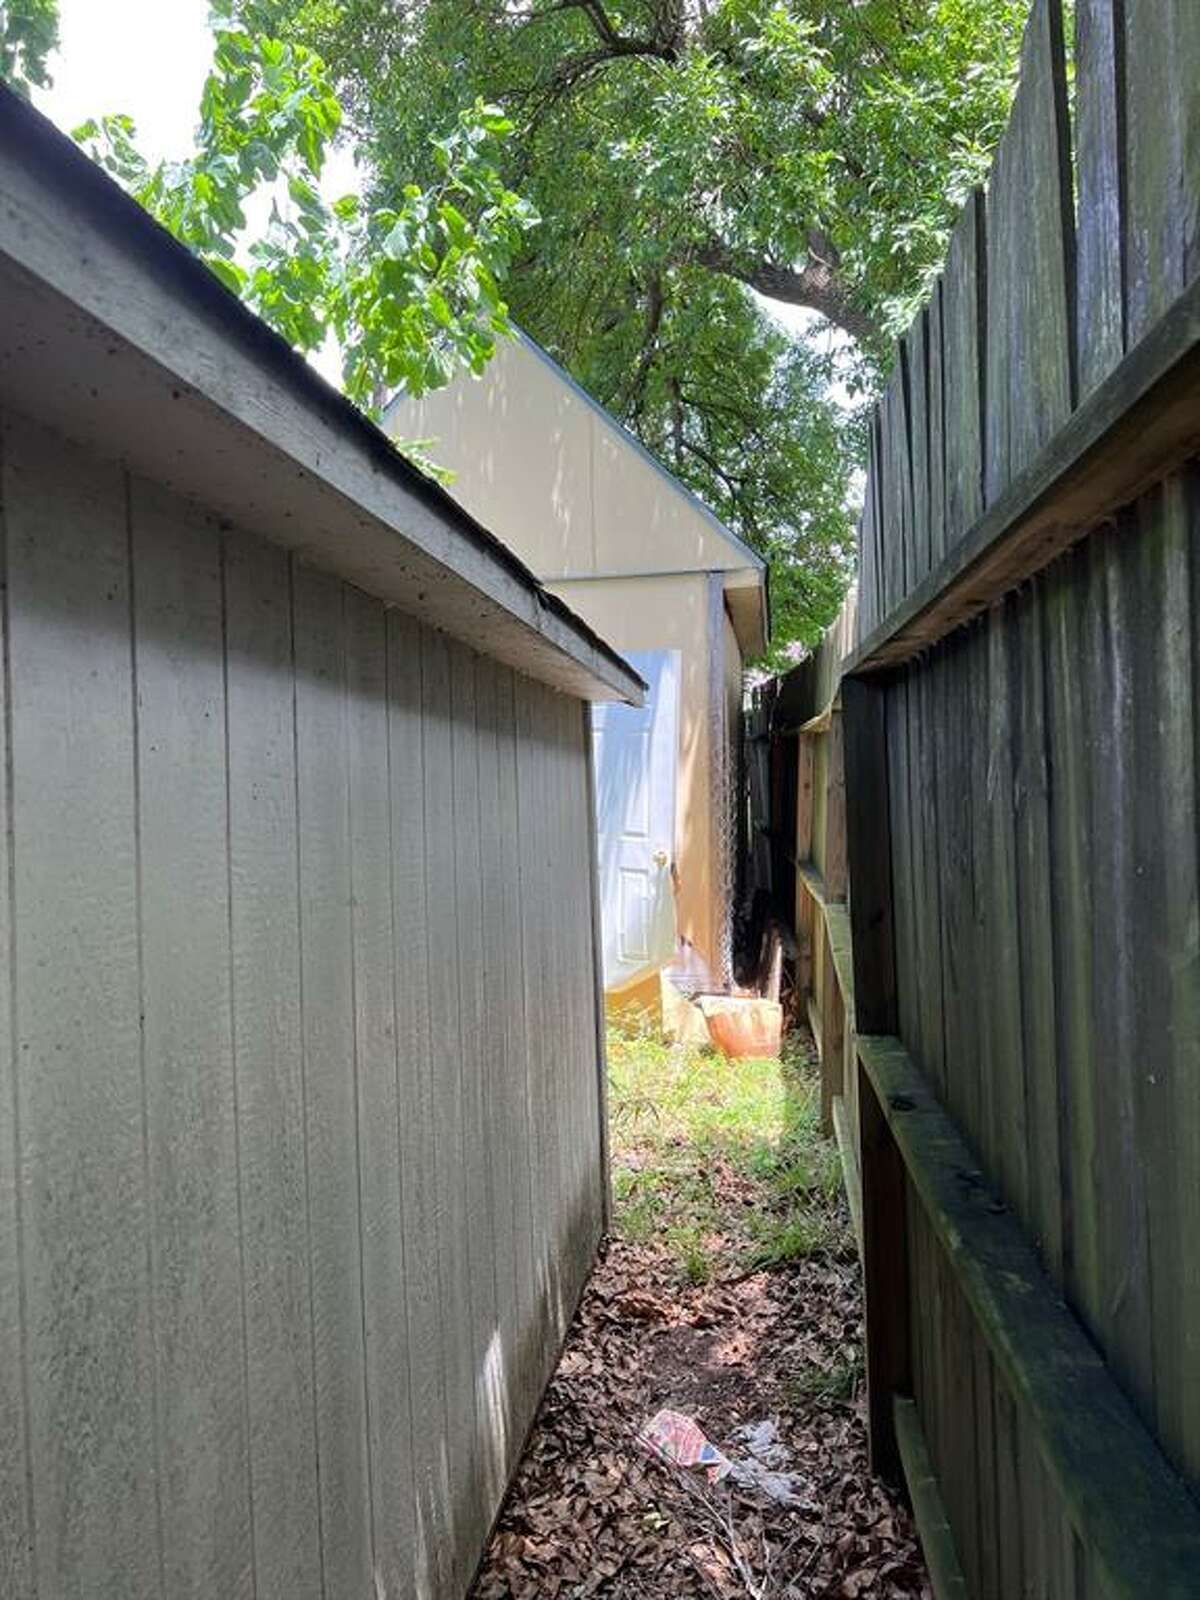 This 1,005-square-foot lot at 4630 B Willow St. in Bellaire was listed as for sale on HAR.com 10 days ago, with an asking price of $50,000.